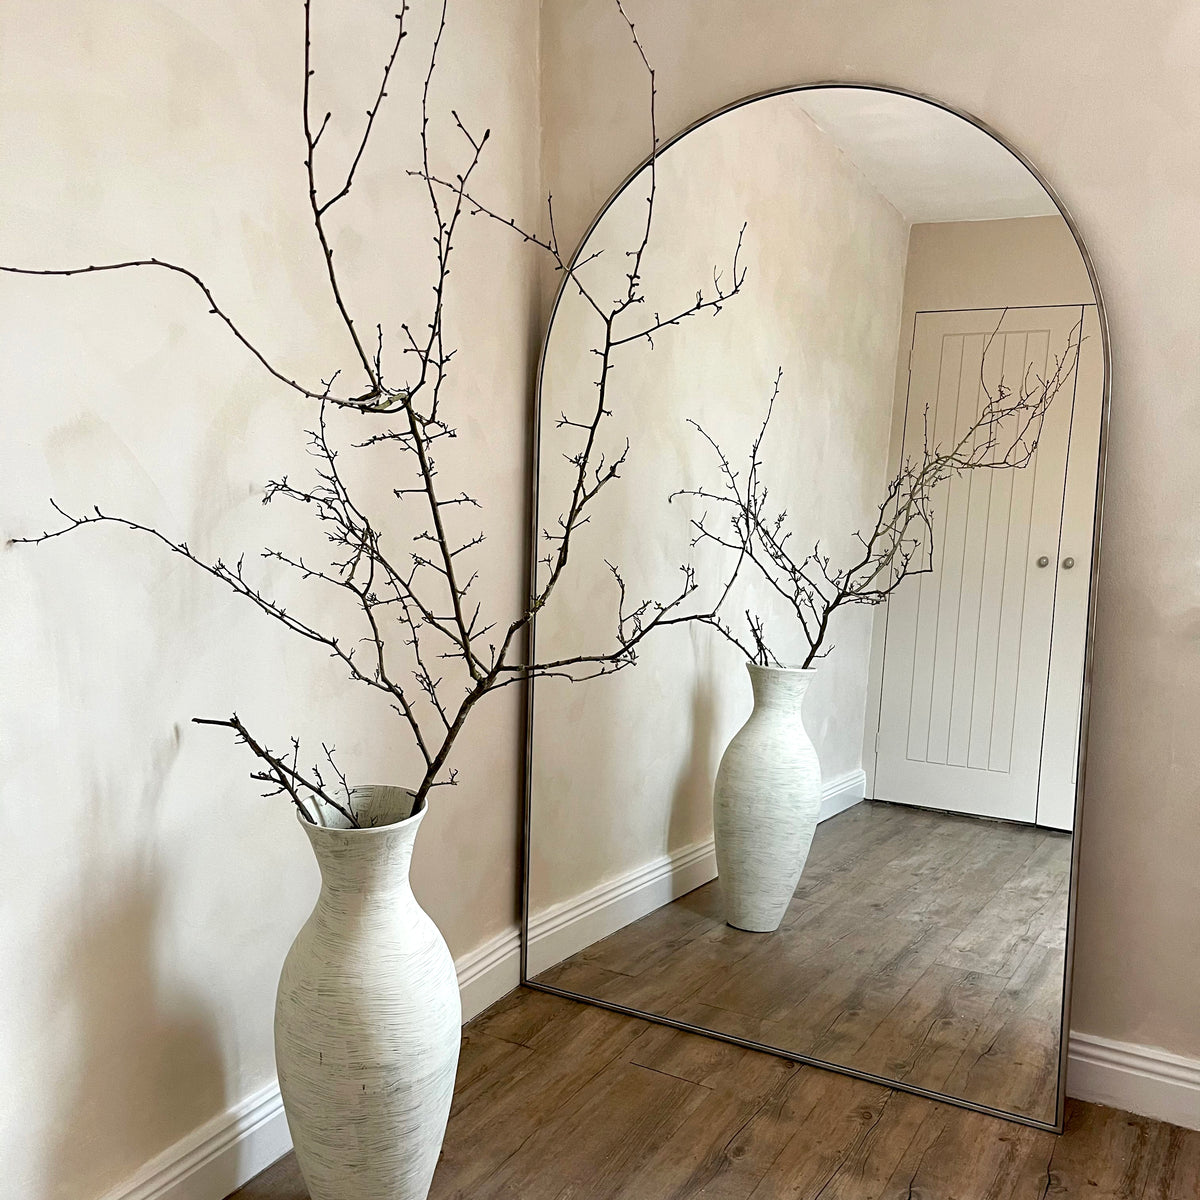 Champagne Full Length Arched Metal Mirror leaning against wall beside vase